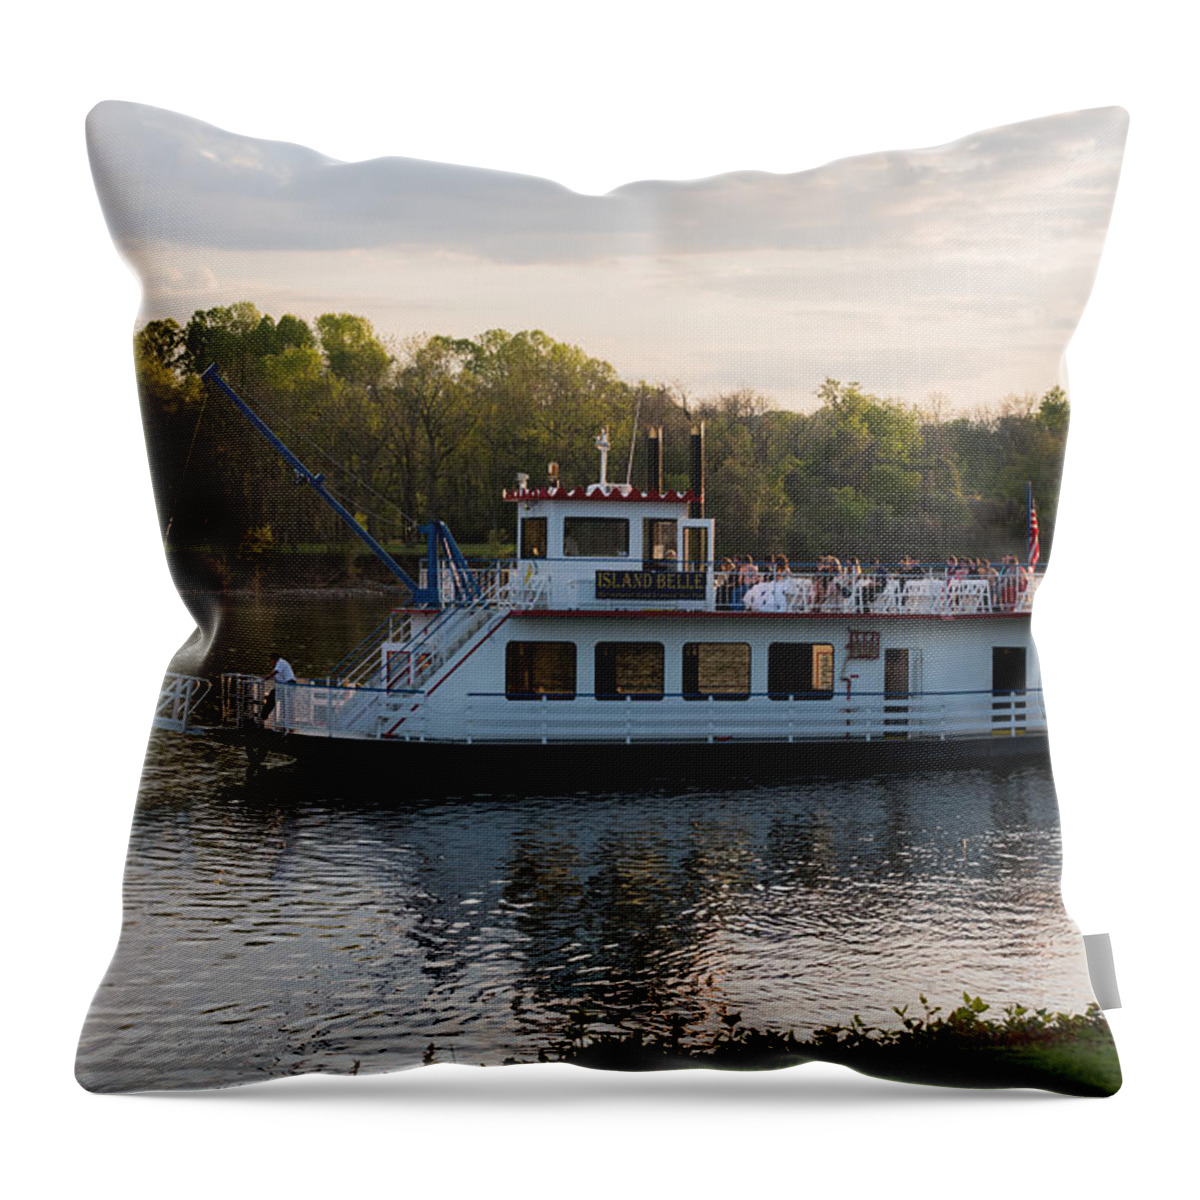 Island Belle Throw Pillow featuring the photograph Island Belle Sternwheeler by Holden The Moment